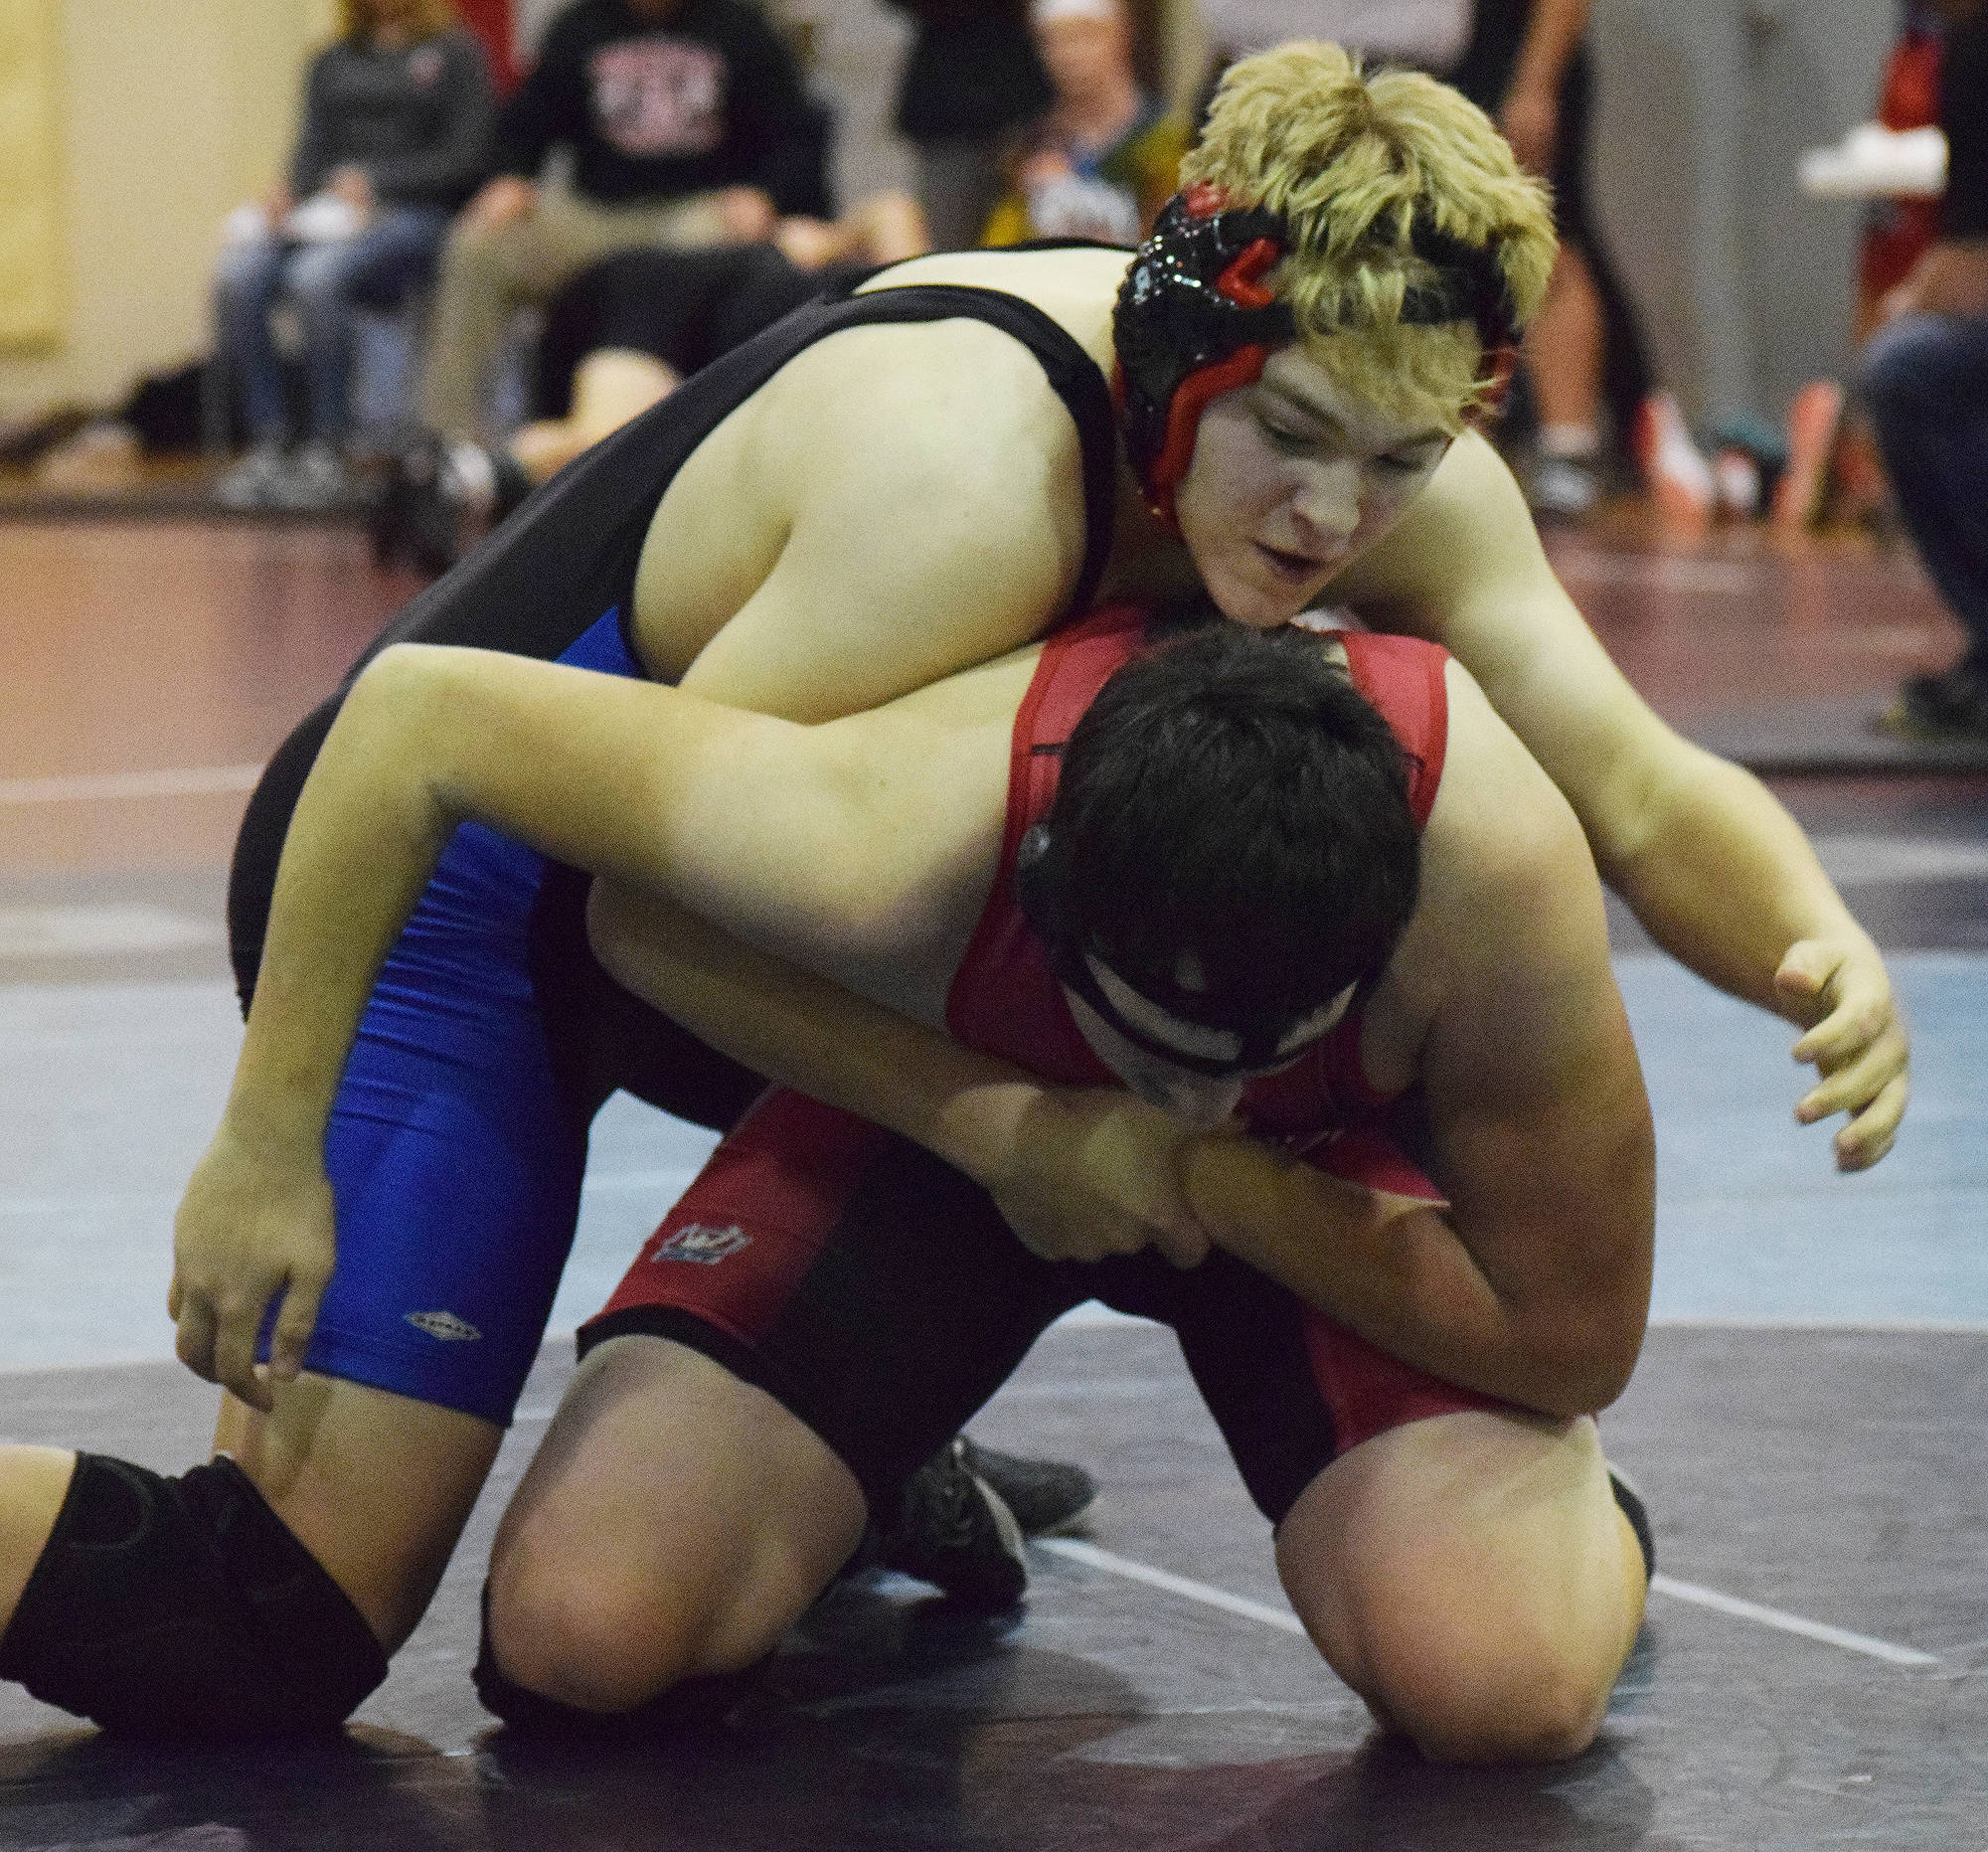 Soldotna’s Max Rogers attempts to pin Kenai Central’s Rocky Sherbahn in a 182-pound match Saturday at the North-South tournament at Soldotna Prep School. (Photo by Joey Klecka/Peninsula Clarion)